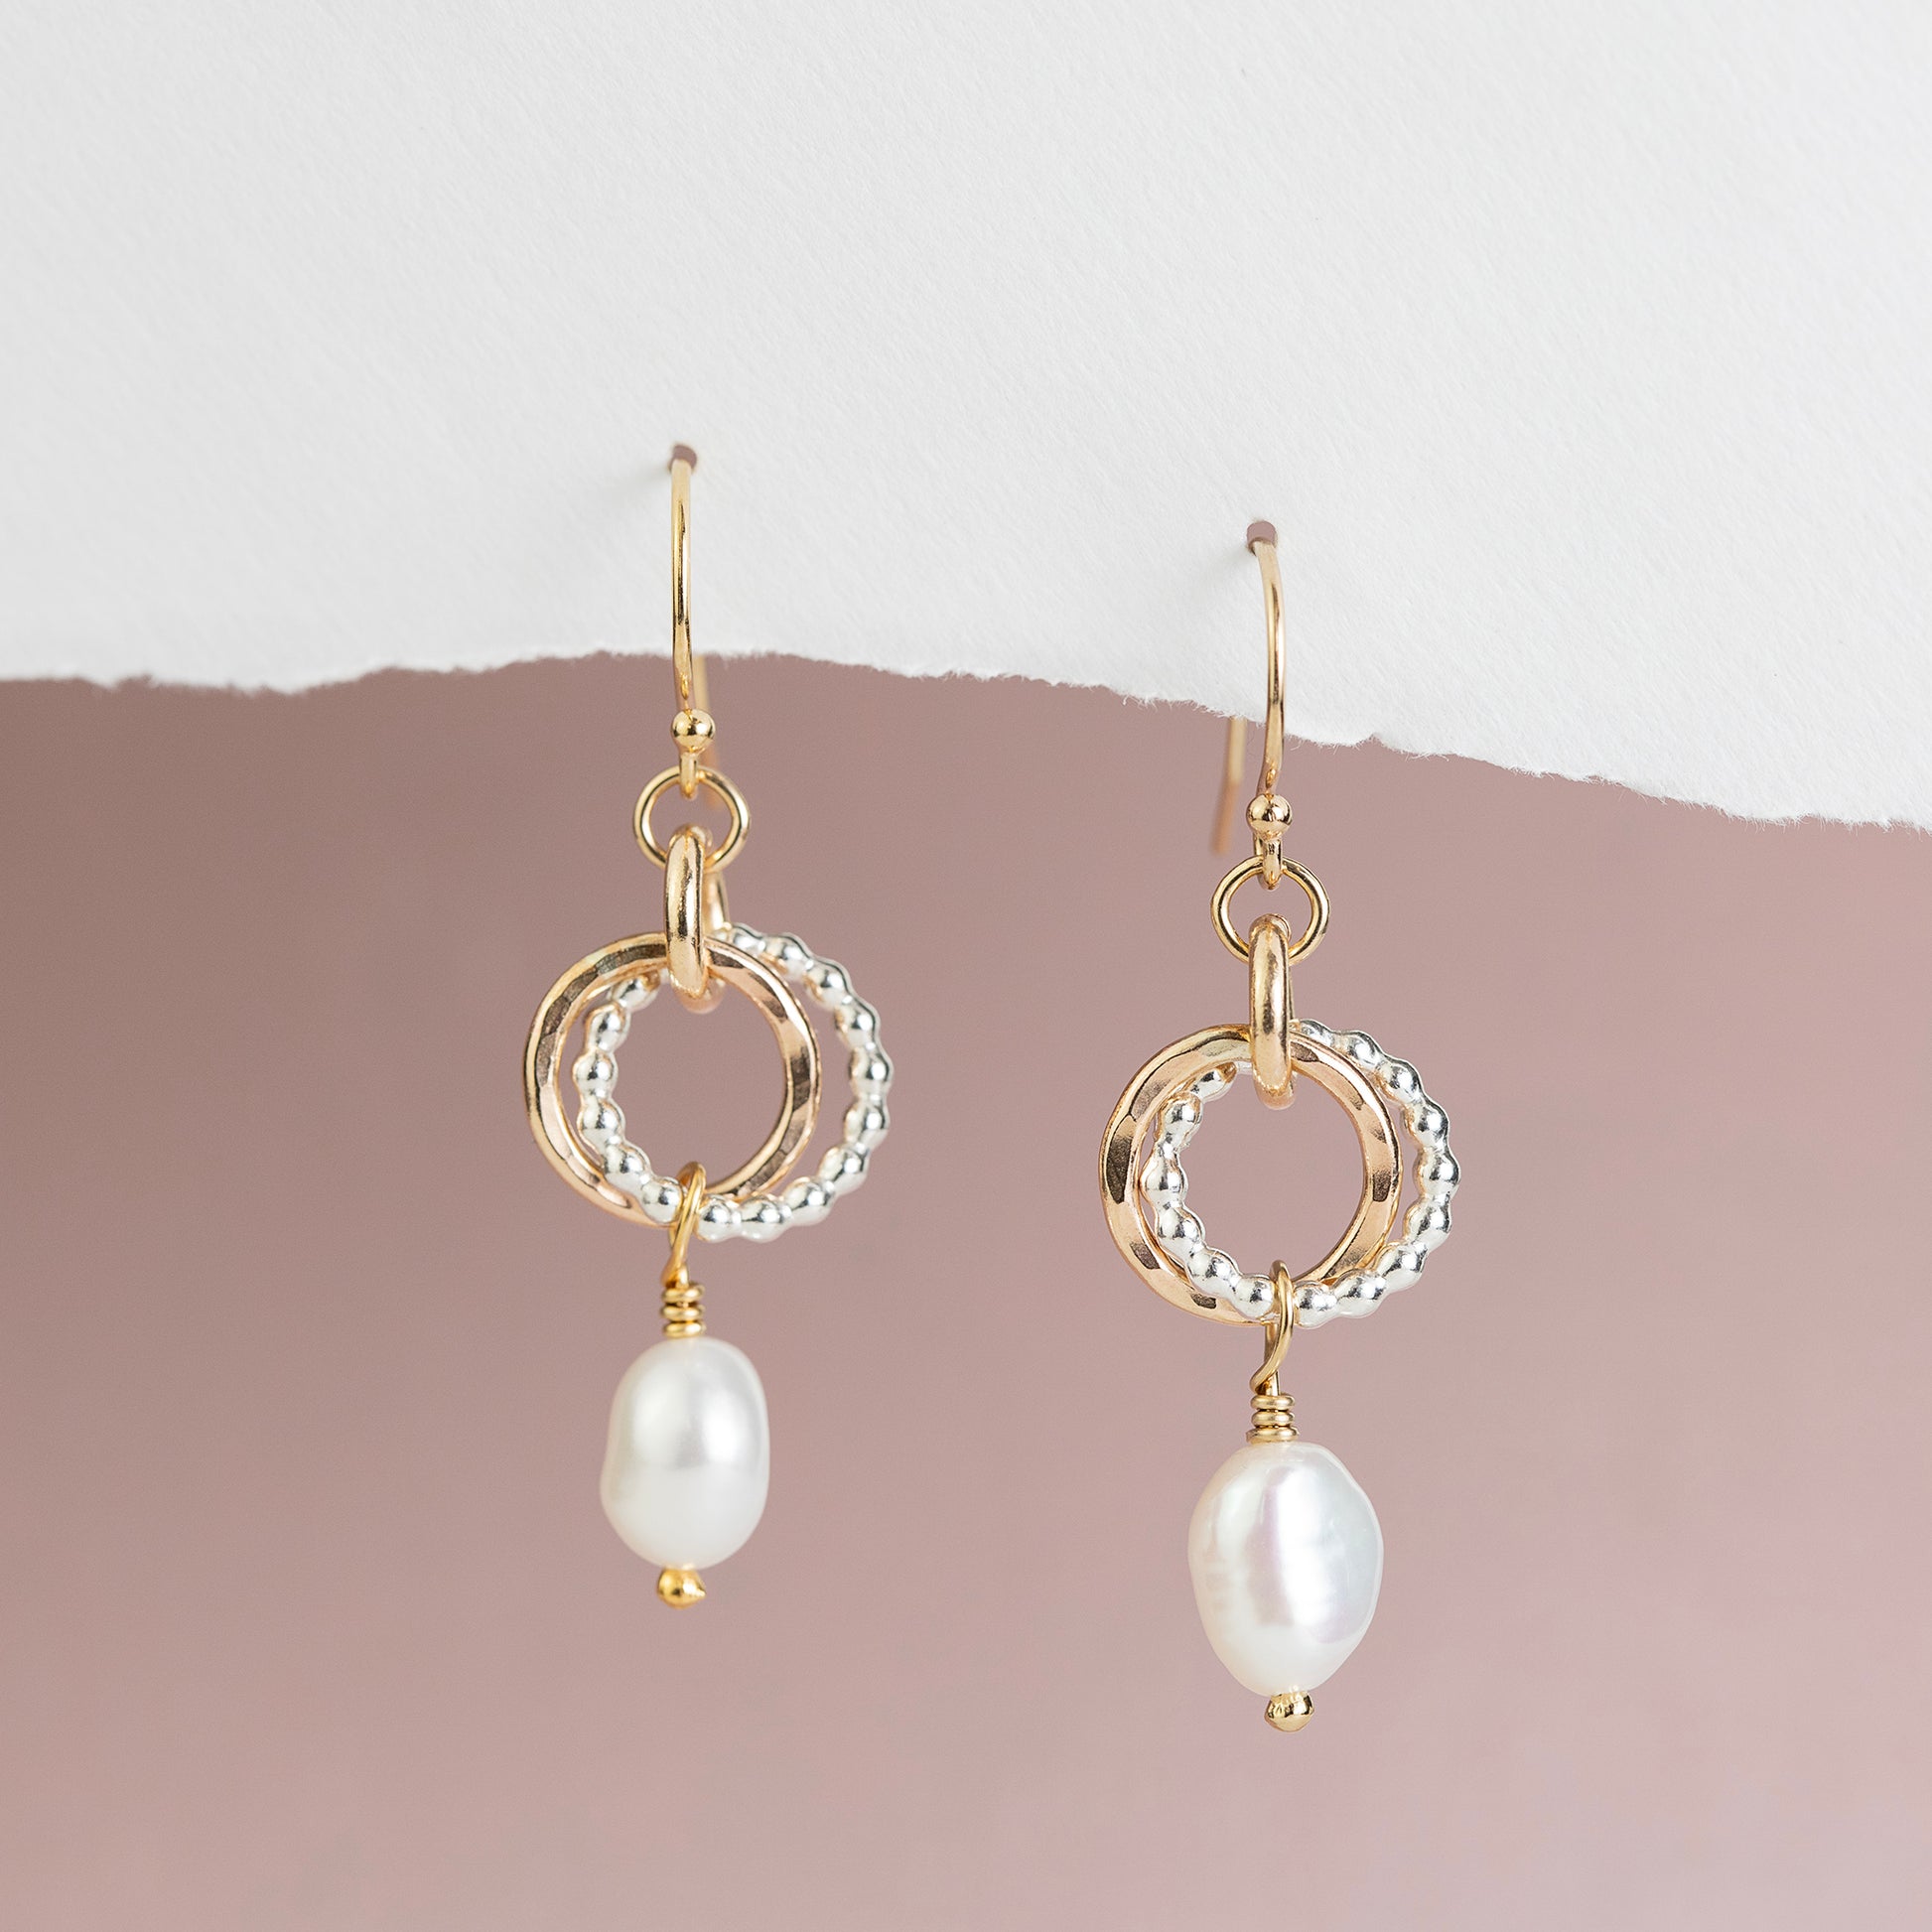 Friend & Bridesmaid Gift - Love Knot Pearl Earrings - Silver & Gold